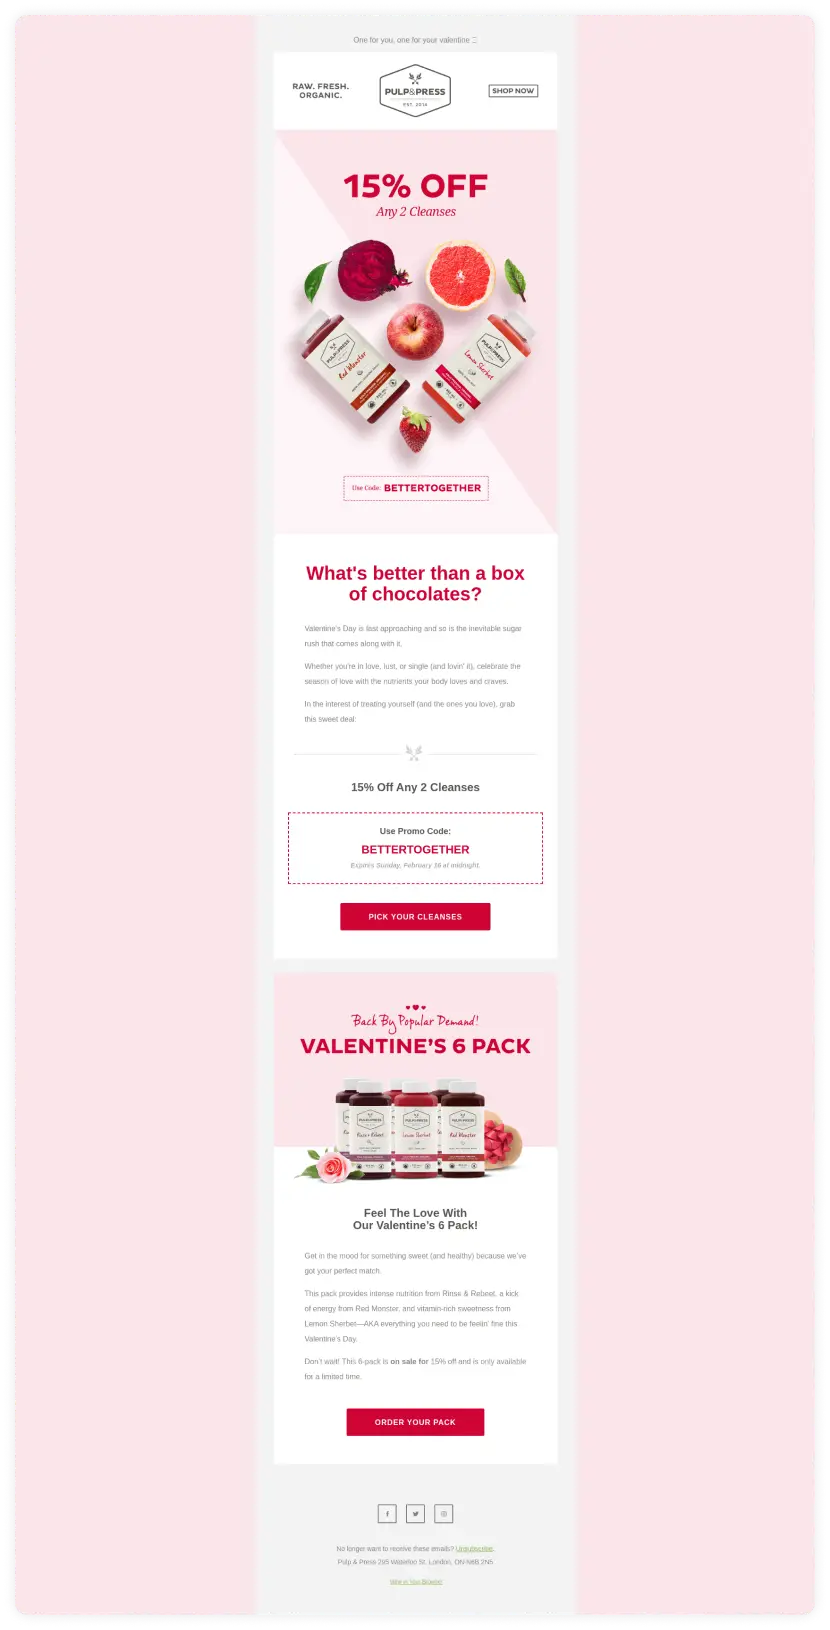 Promotional email example